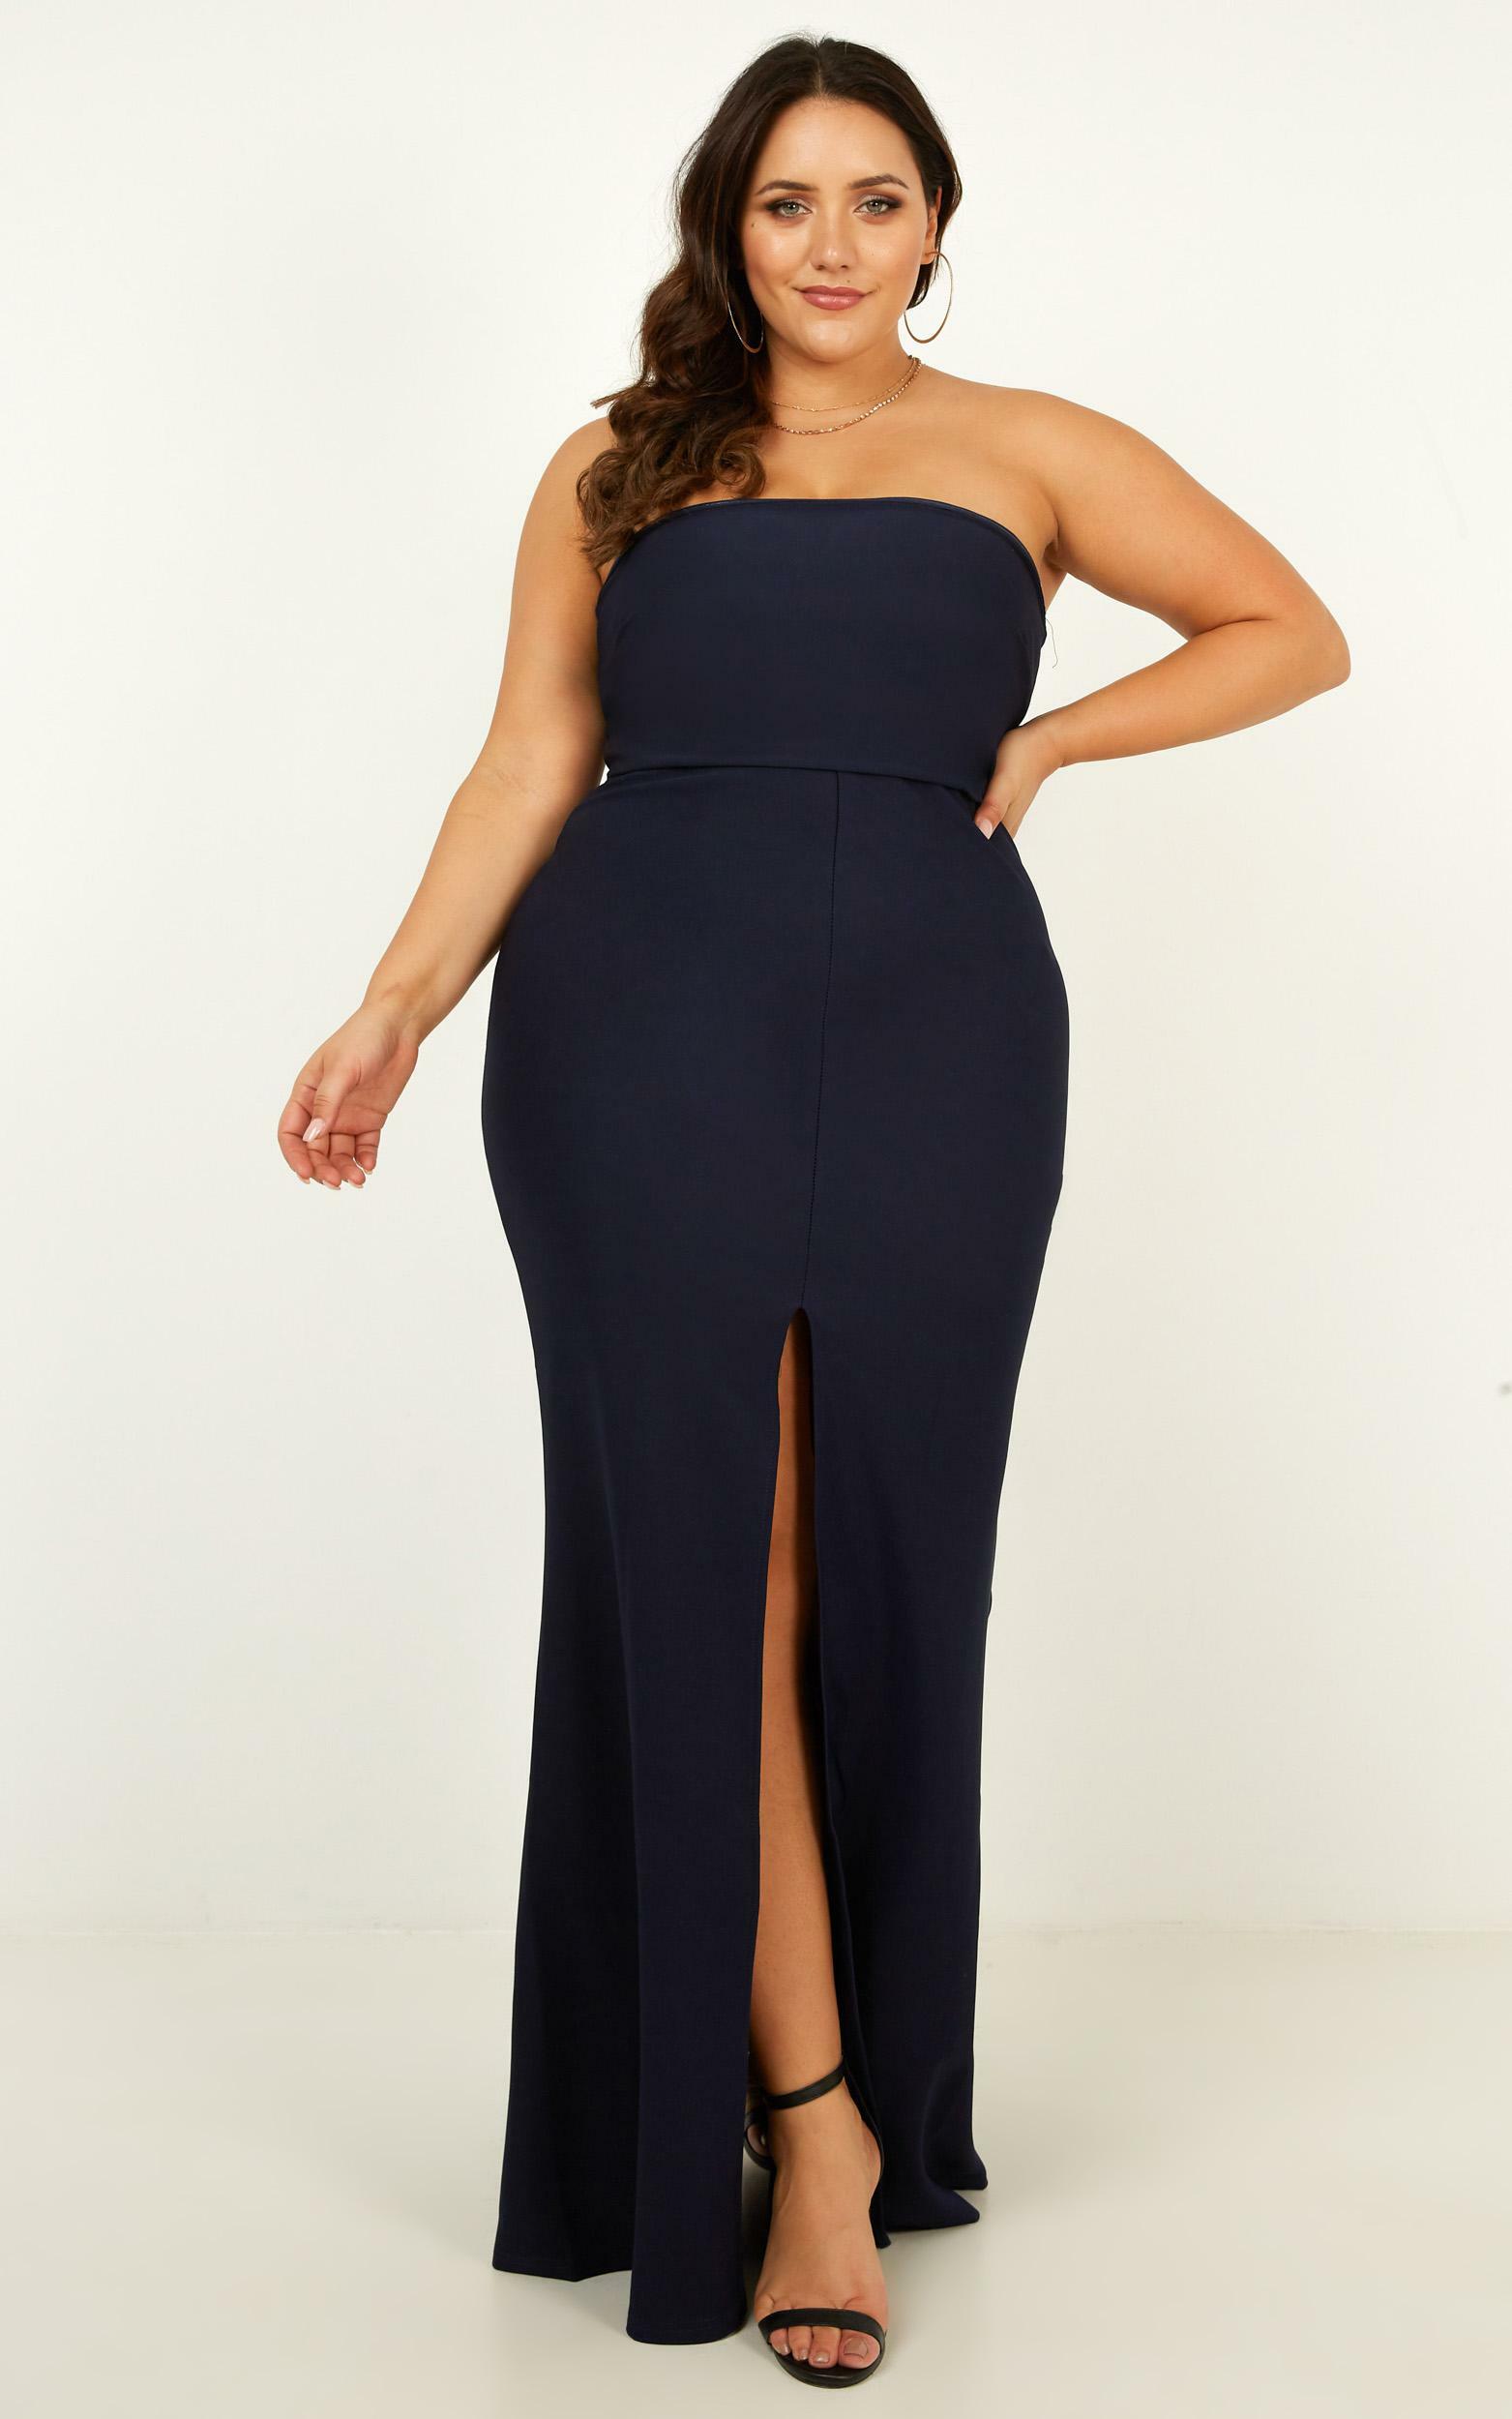 One More Kiss Maxi Dress in Navy - 20, NVY1, hi-res image number null